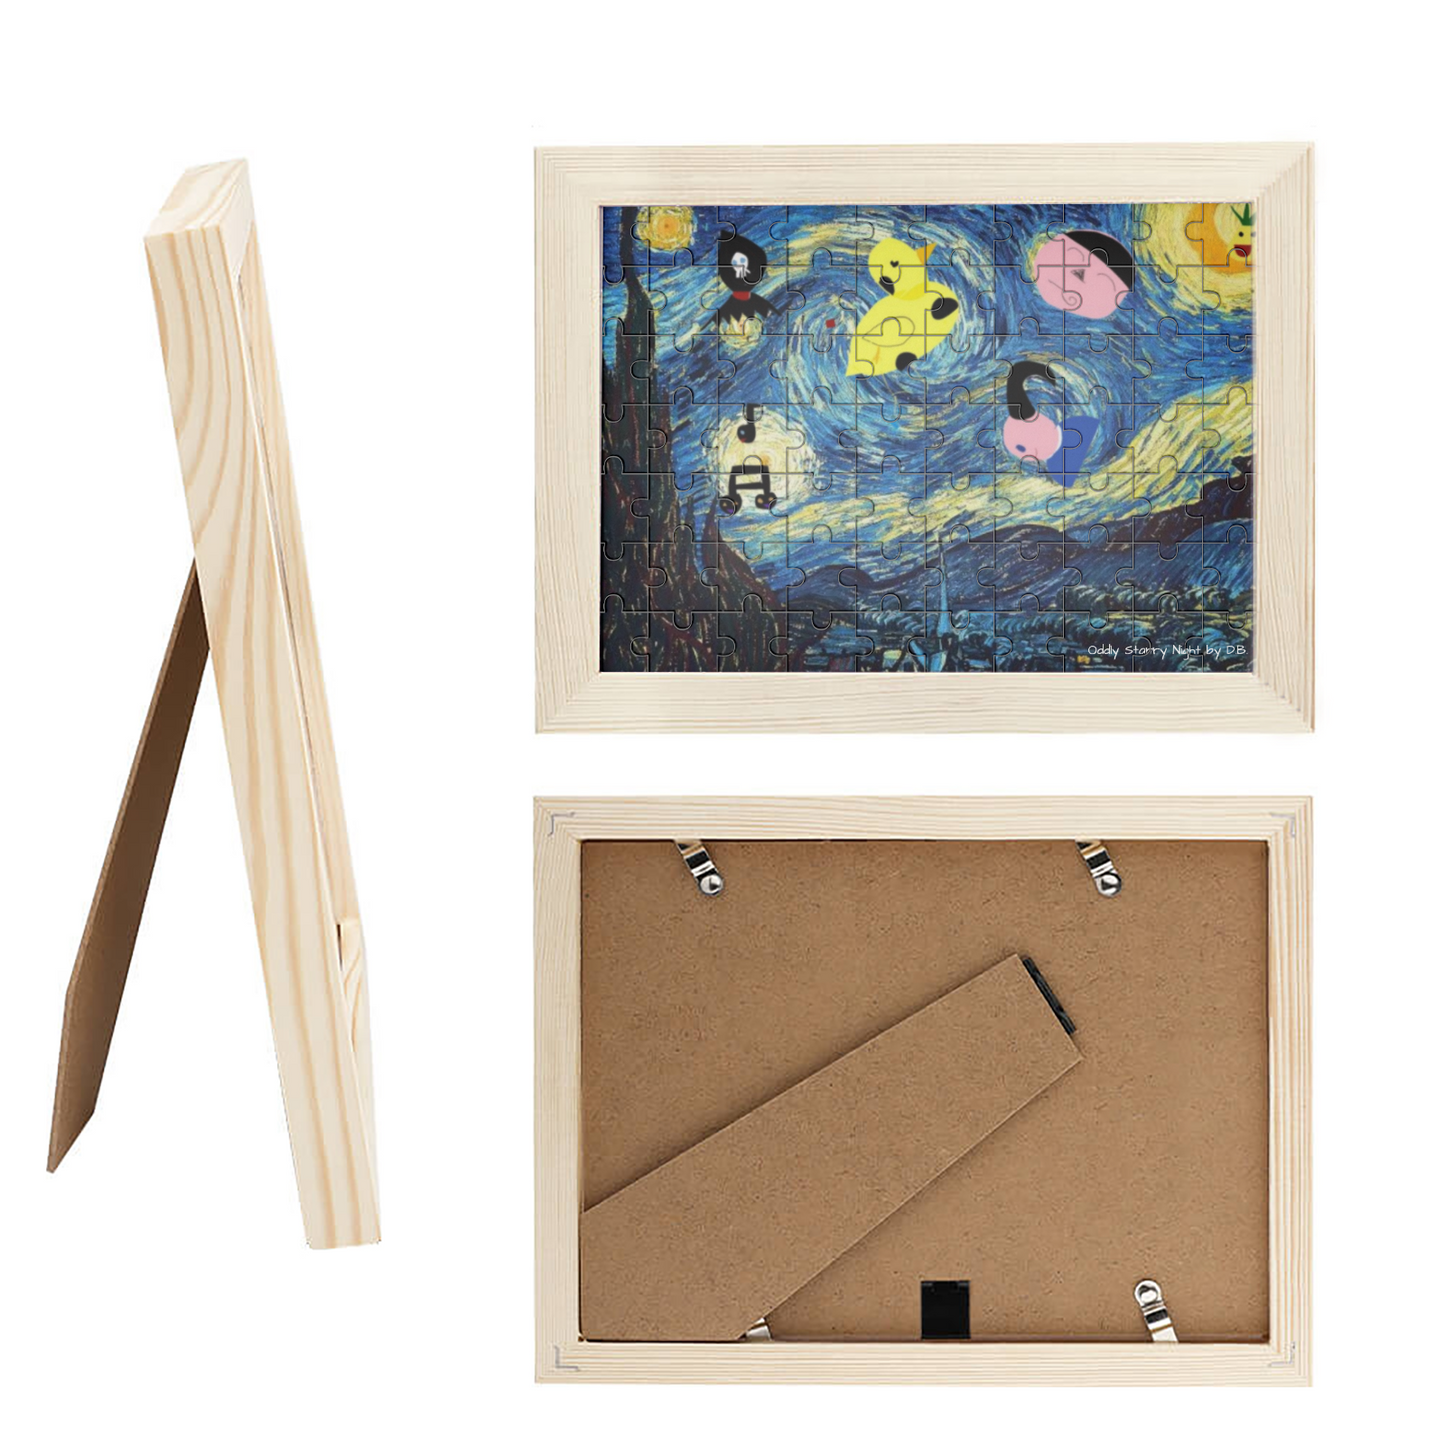 Jigsaw Puzzle Photo Frame with Oddly Starry Night by D.B. Print